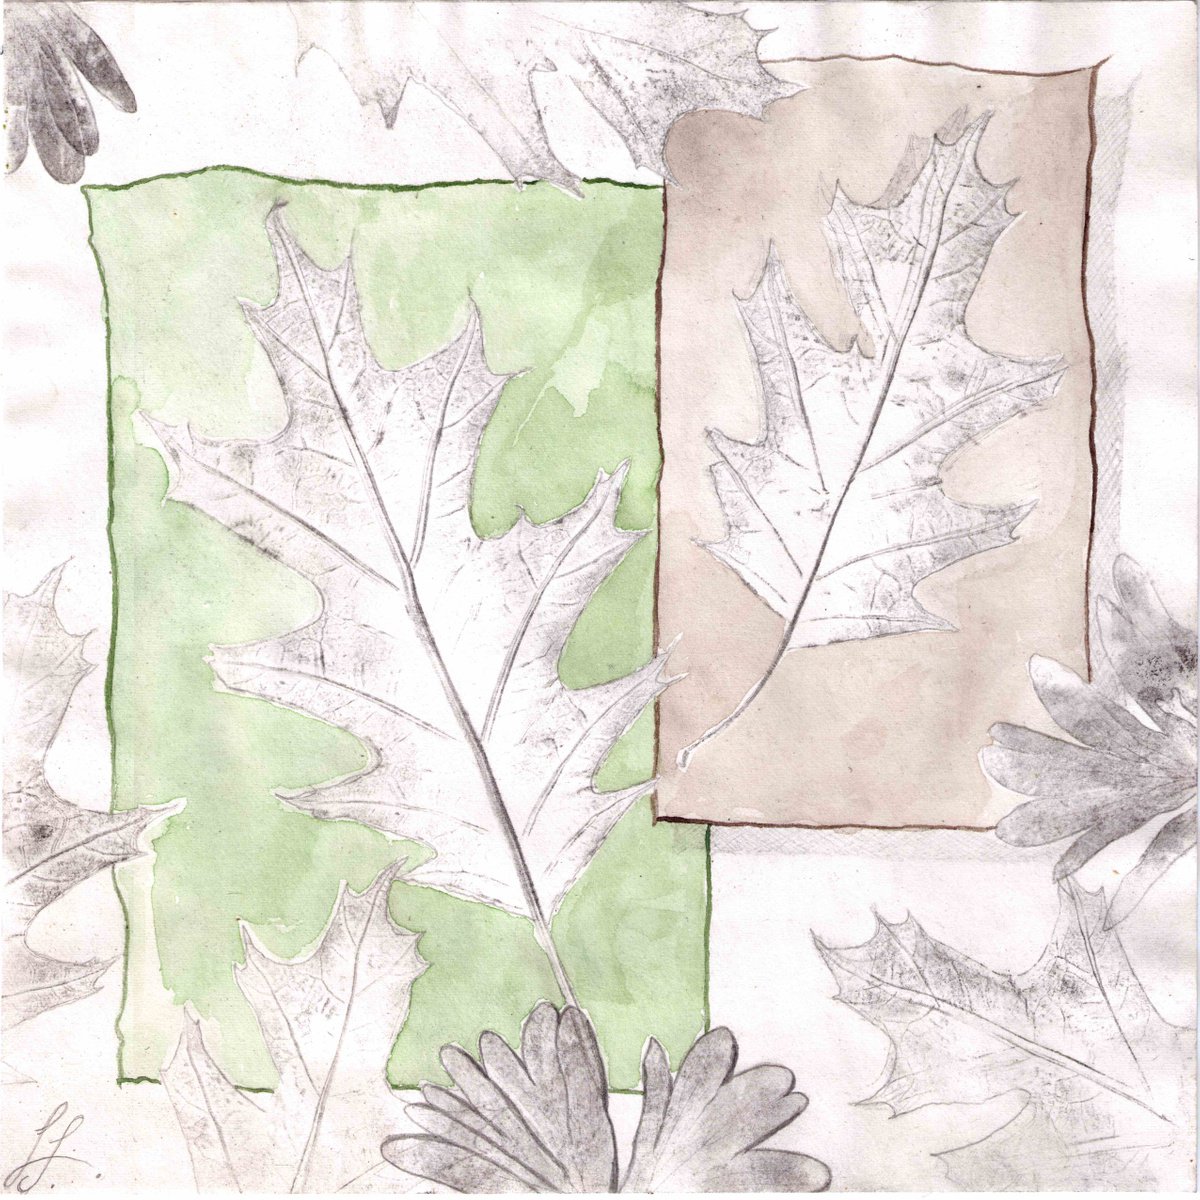 Plant Study #7 - Leaves from the Past & Present by Laura Sttefeld